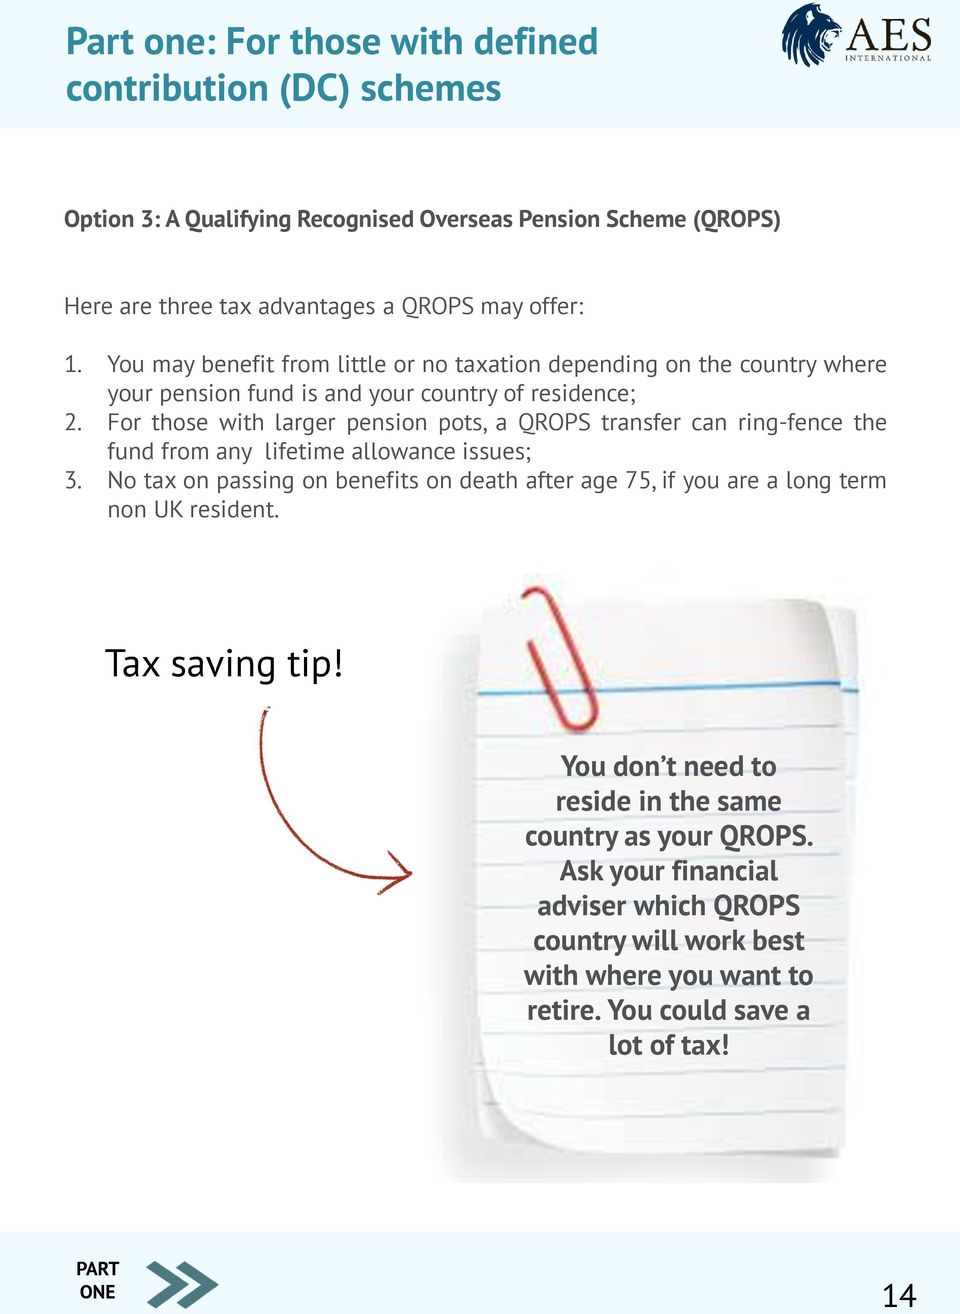 For those with larger pension pots, a QROPS transfer can ring-fence the fund from any lifetime allowance issues; 3.